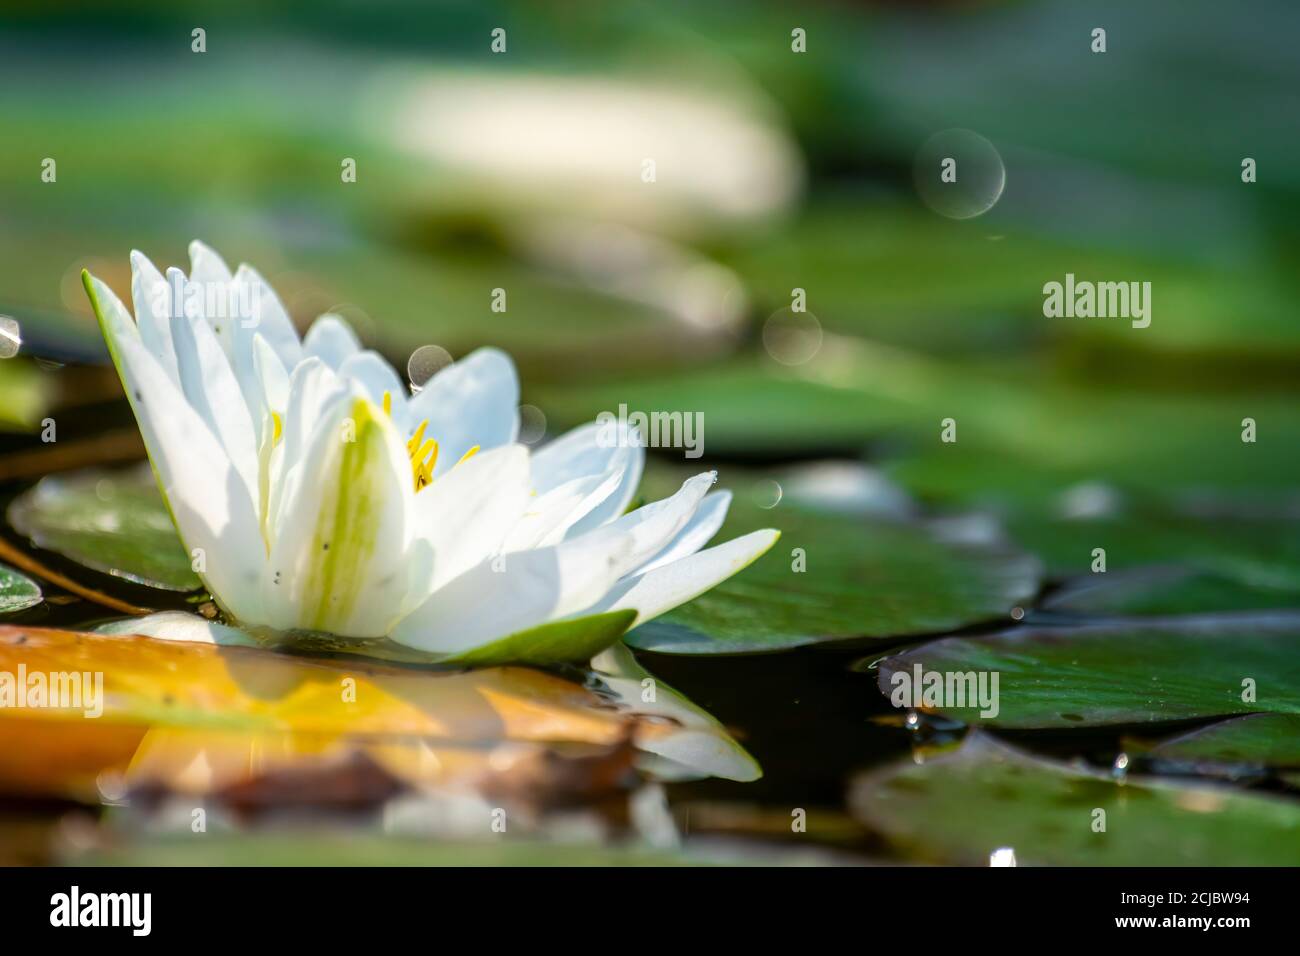 Single water lily with a green leaf floating on water with copy space Stock Photo